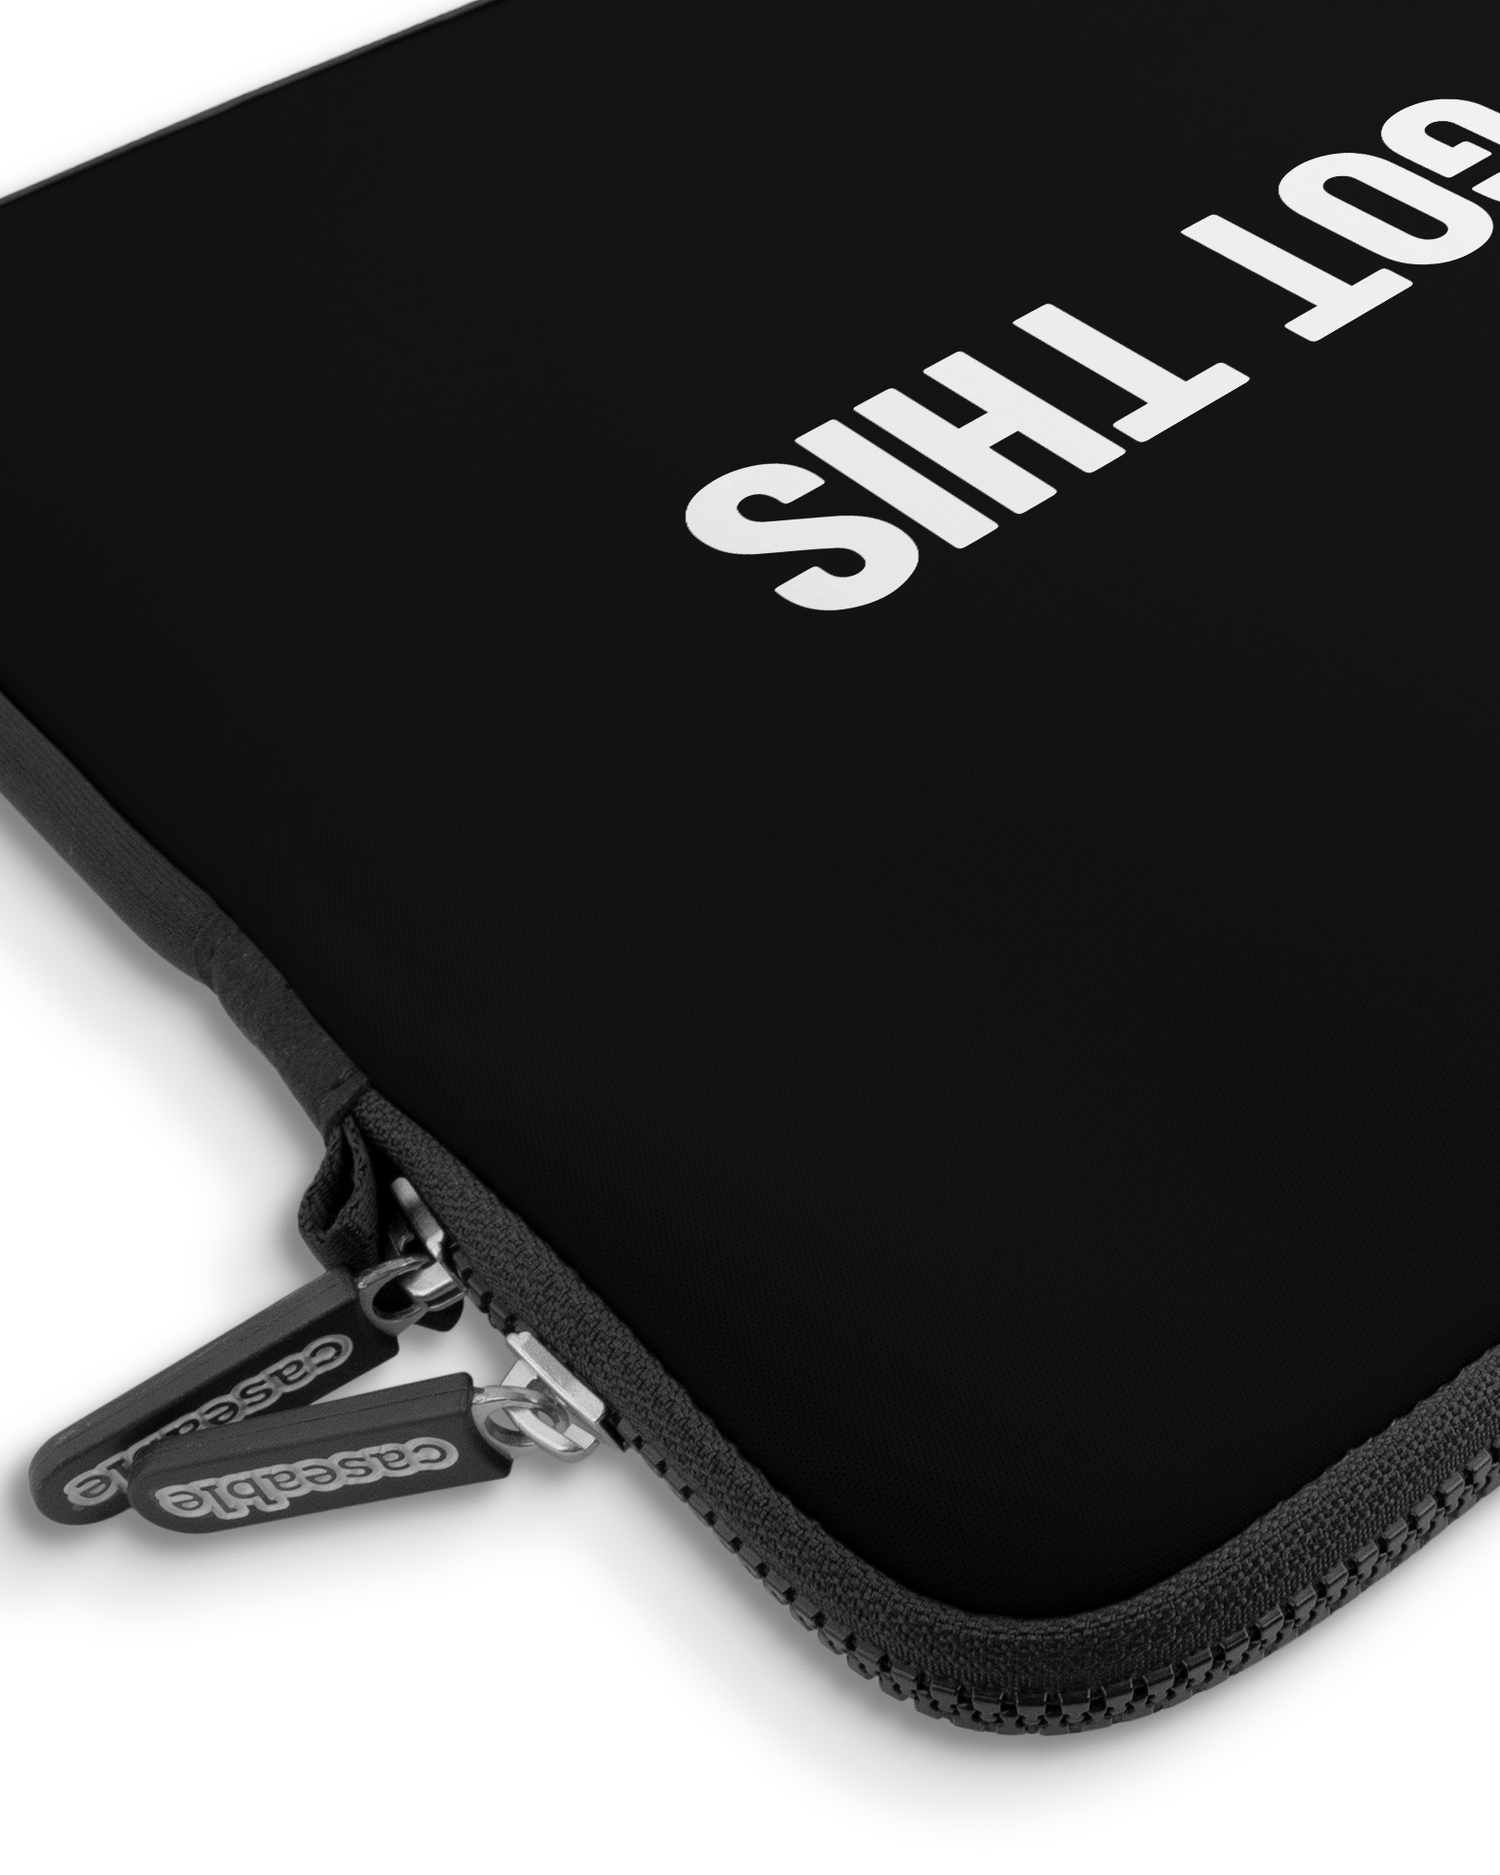 You Got This Black Premium Laptop Bag 15 inch with device inside